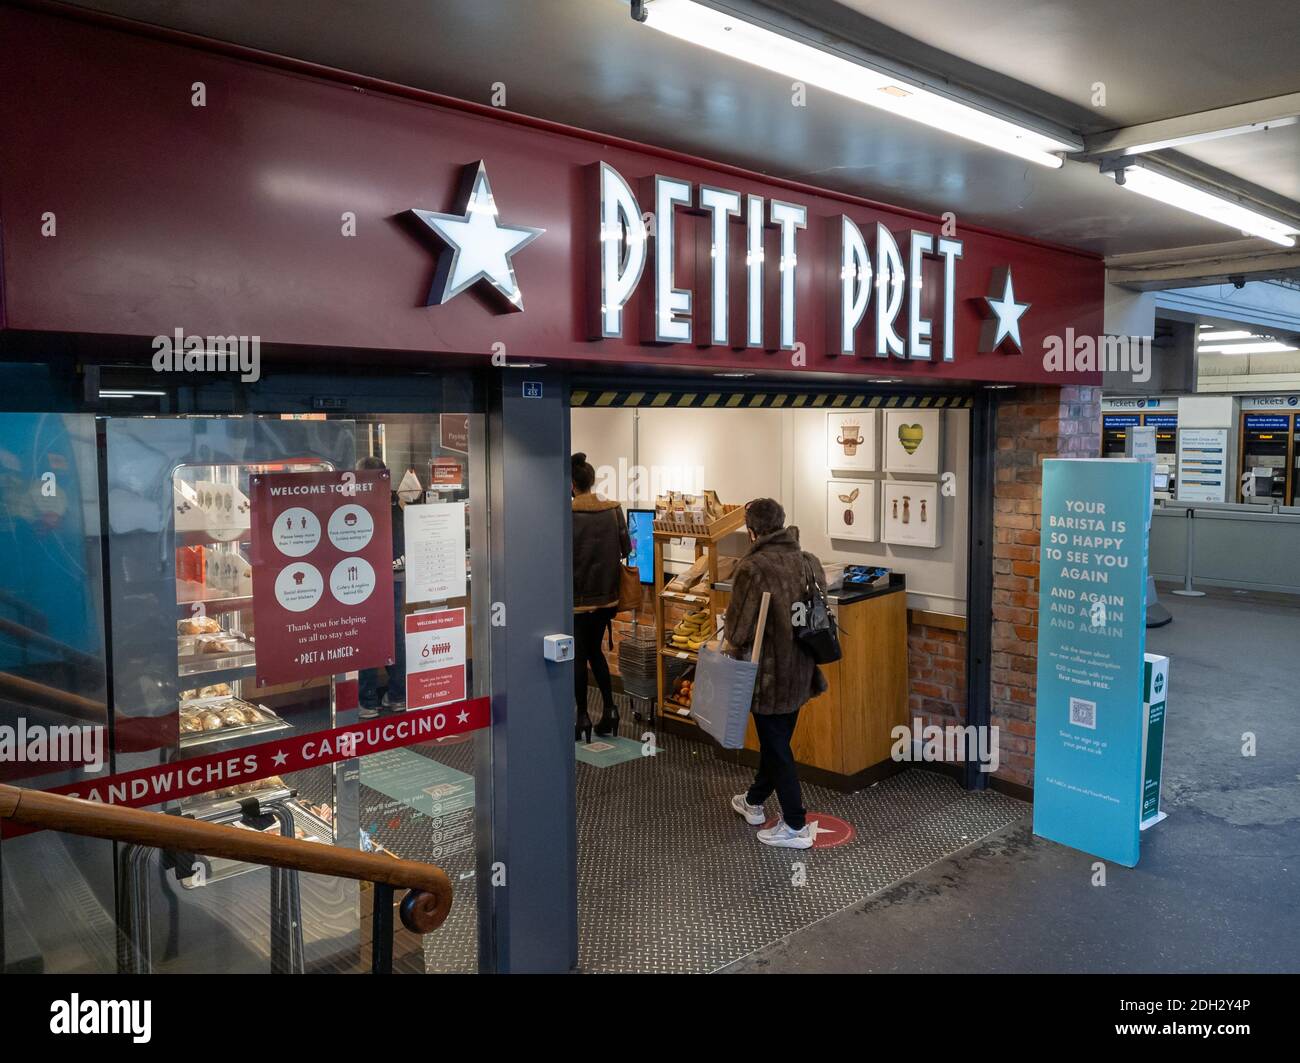 A branch of the chain fast casual restaurant Pret A Manger. Stock Photo